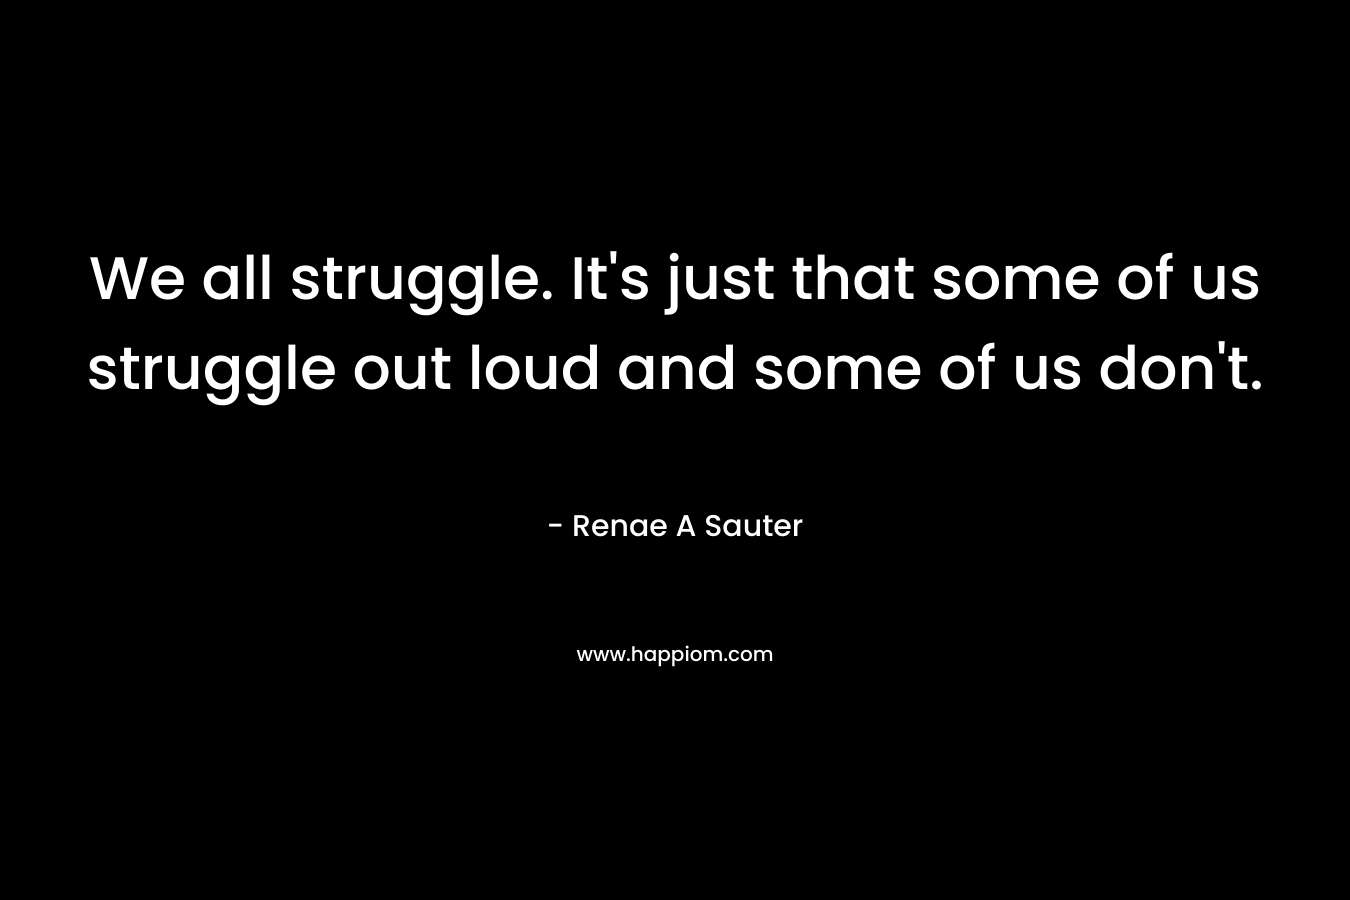 We all struggle. It’s just that some of us struggle out loud and some of us don’t. – Renae A Sauter